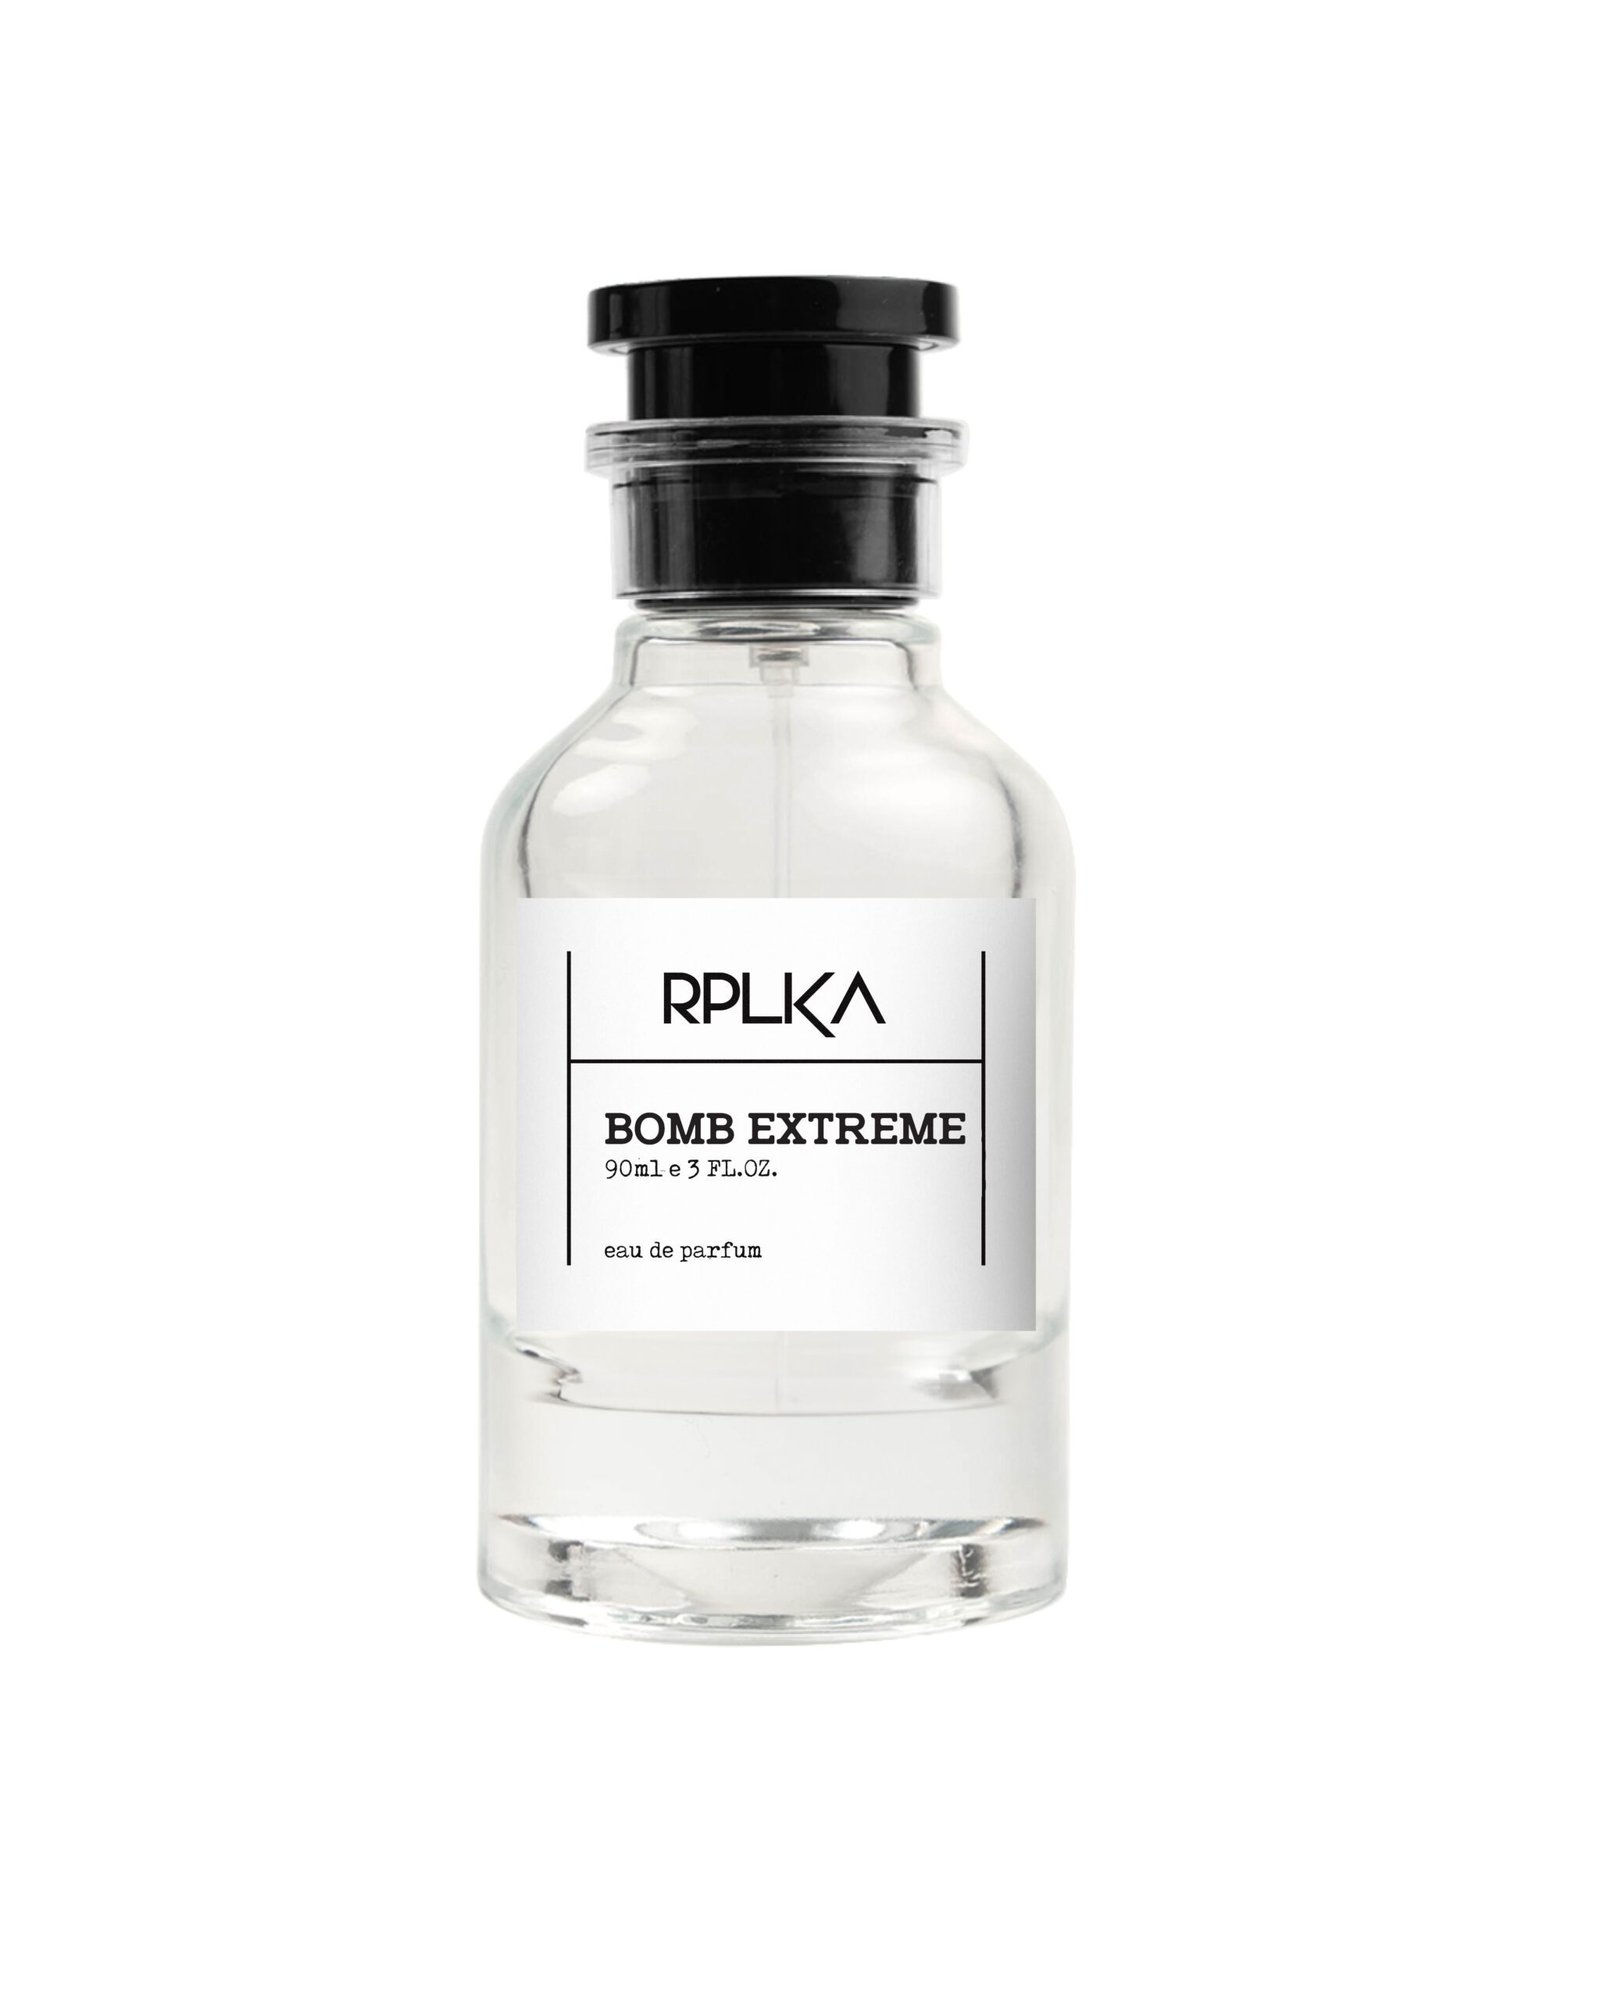 Inspired by SPICEBOMB EXTREME - RPLKA Perfume